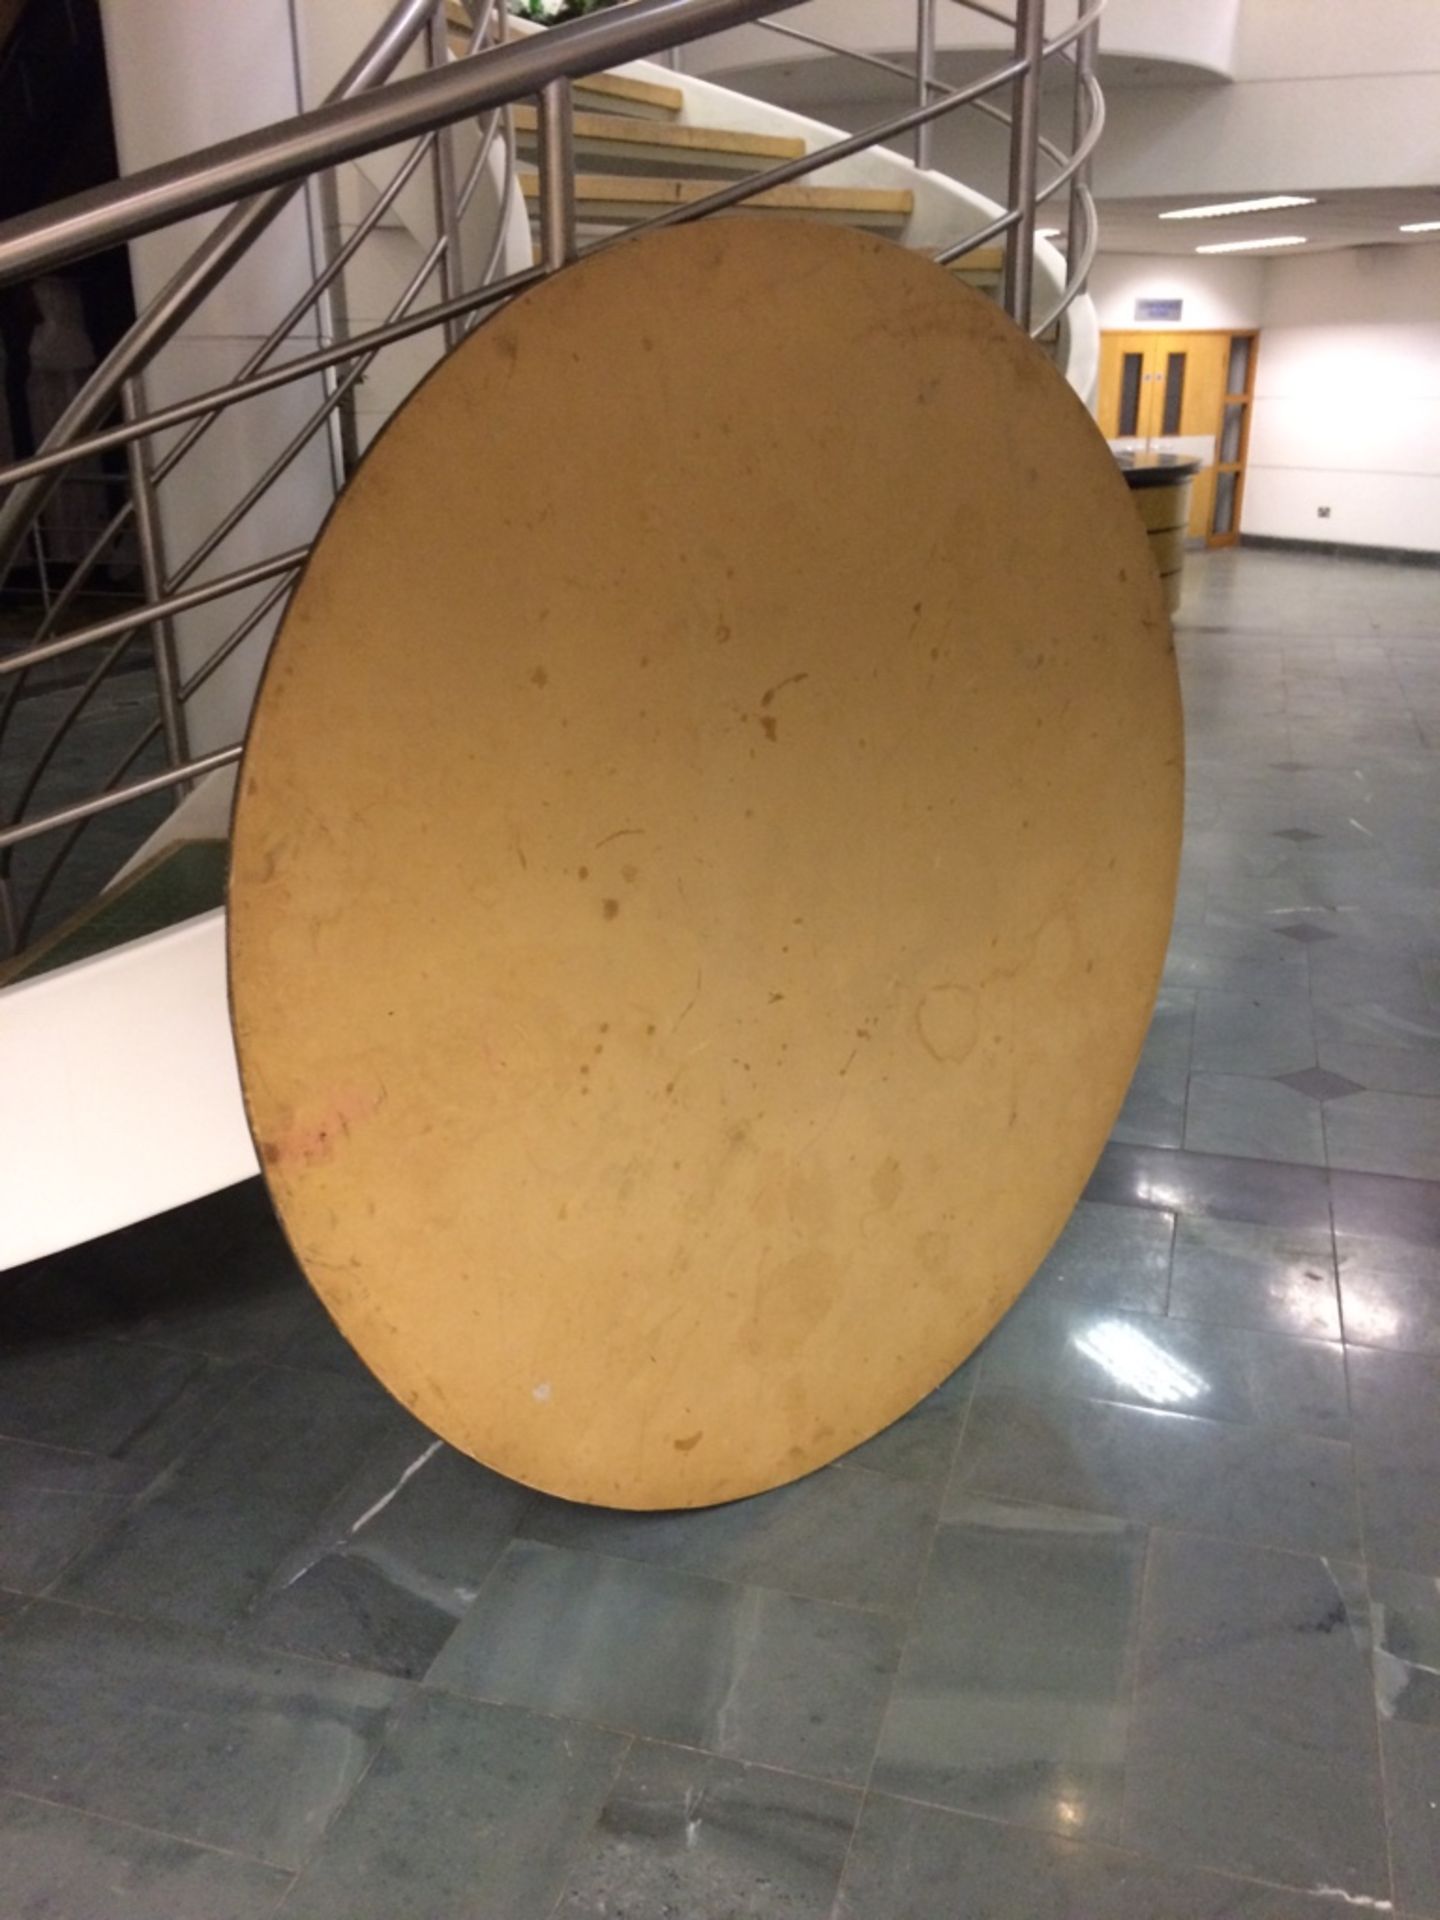 Extra Large 6Ft Round Banqueting Table Top For Use With Lots 1163-1175 - Image 3 of 4